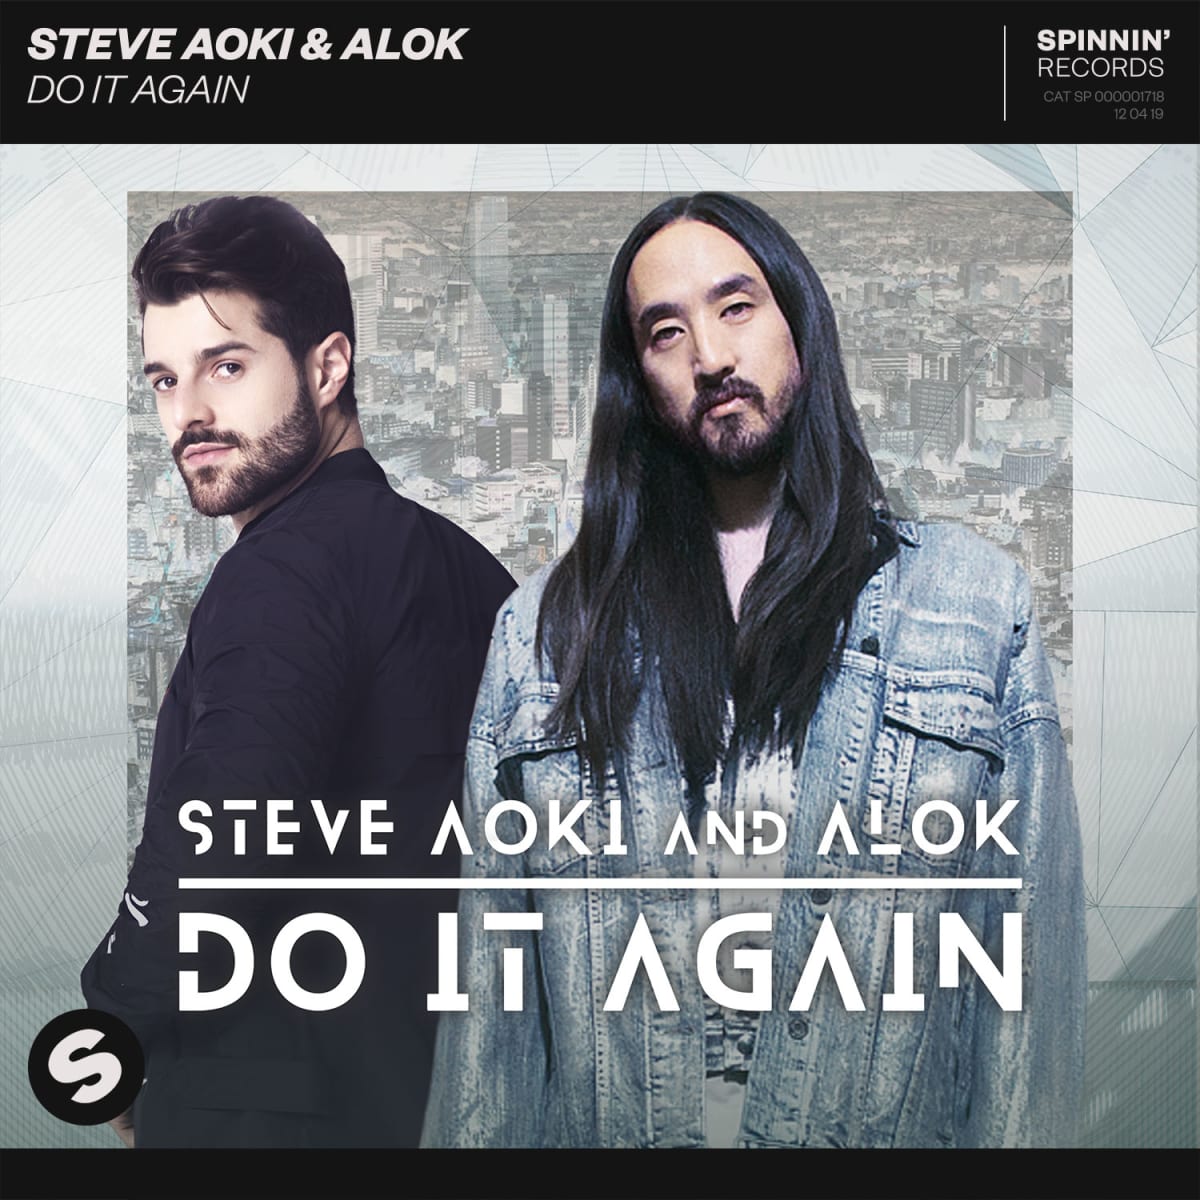 Steve Aoki Alok Pay Homage To The Chemical Brothers With Revival Of Do It Again Edm Com The Latest Electronic Dance Music News Reviews Artists All mixes are presented with details: steve aoki alok pay homage to the